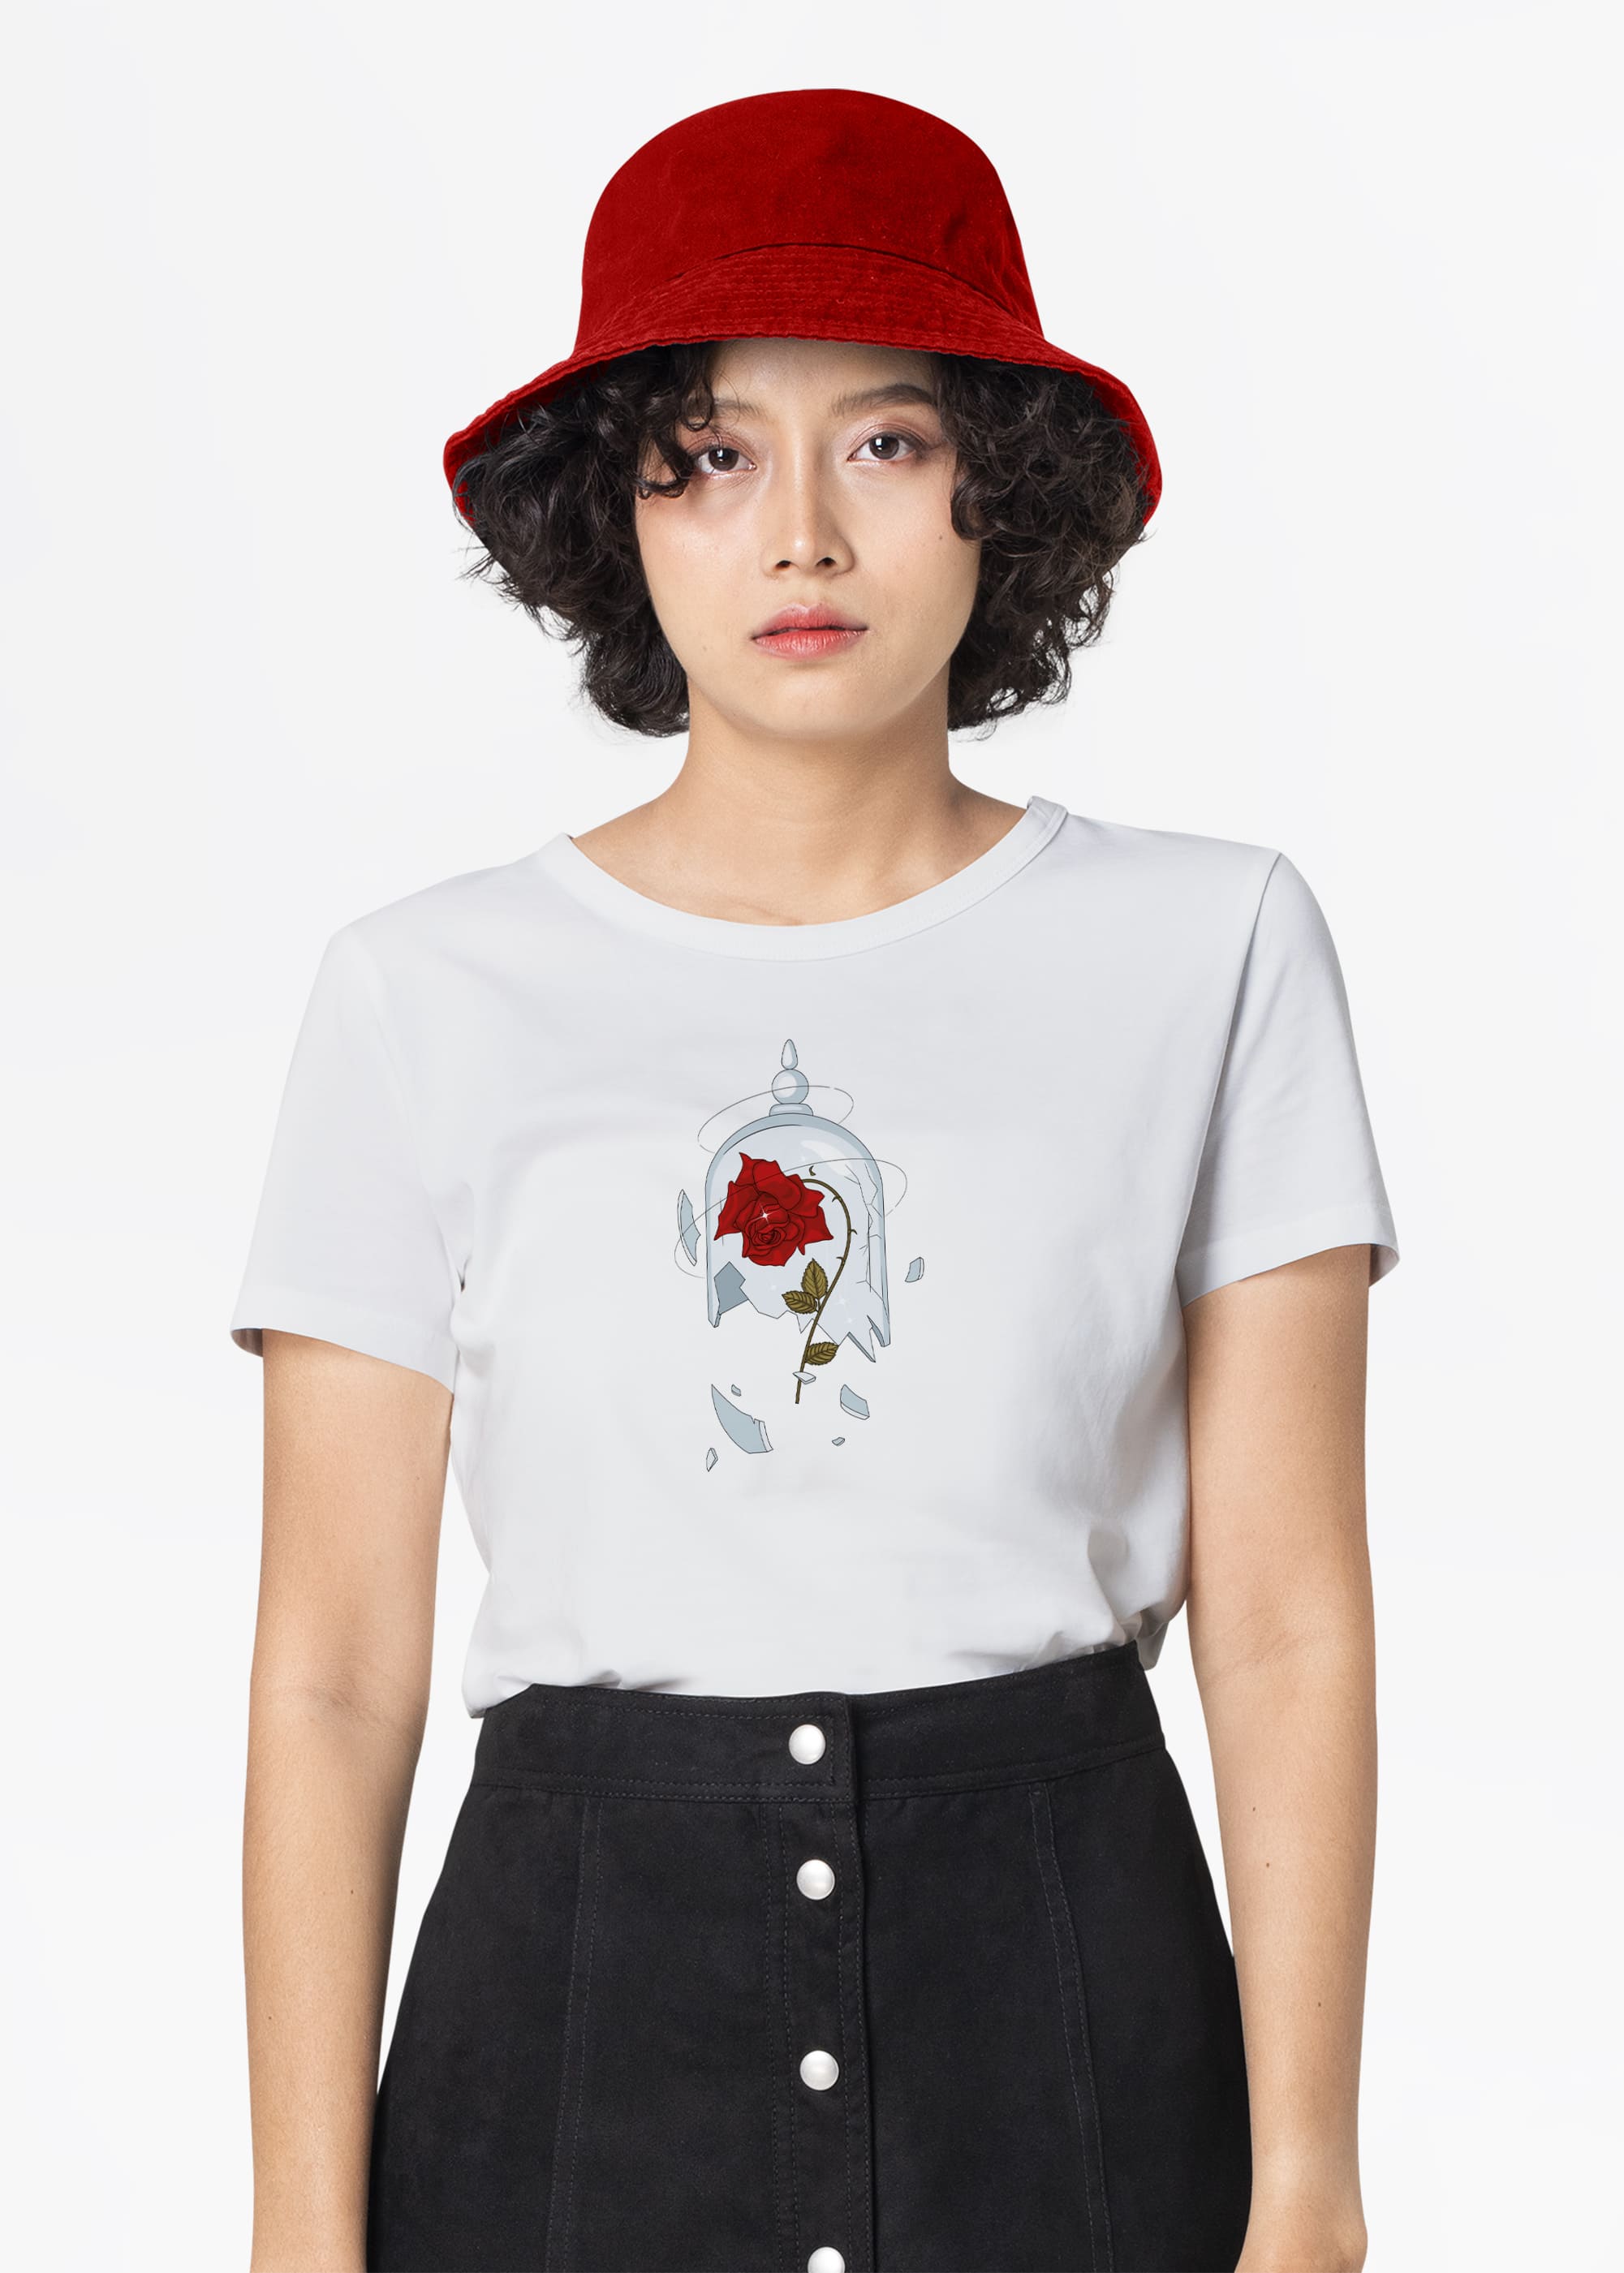 Minimalistic red rose on a classic white t-shirt.